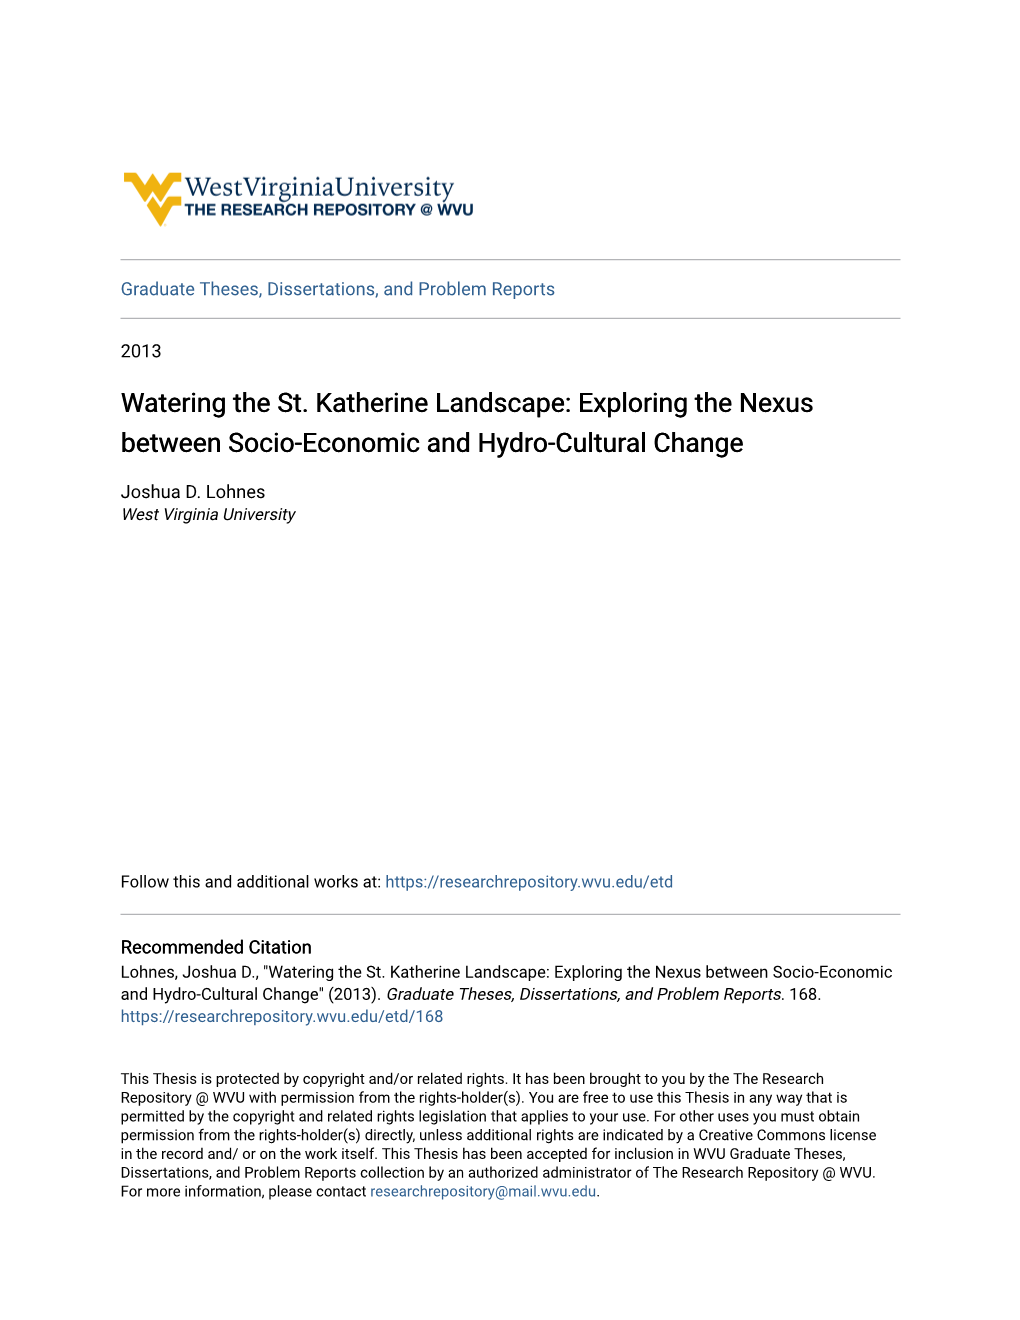 Watering the St. Katherine Landscape: Exploring the Nexus Between Socio-Economic and Hydro-Cultural Change